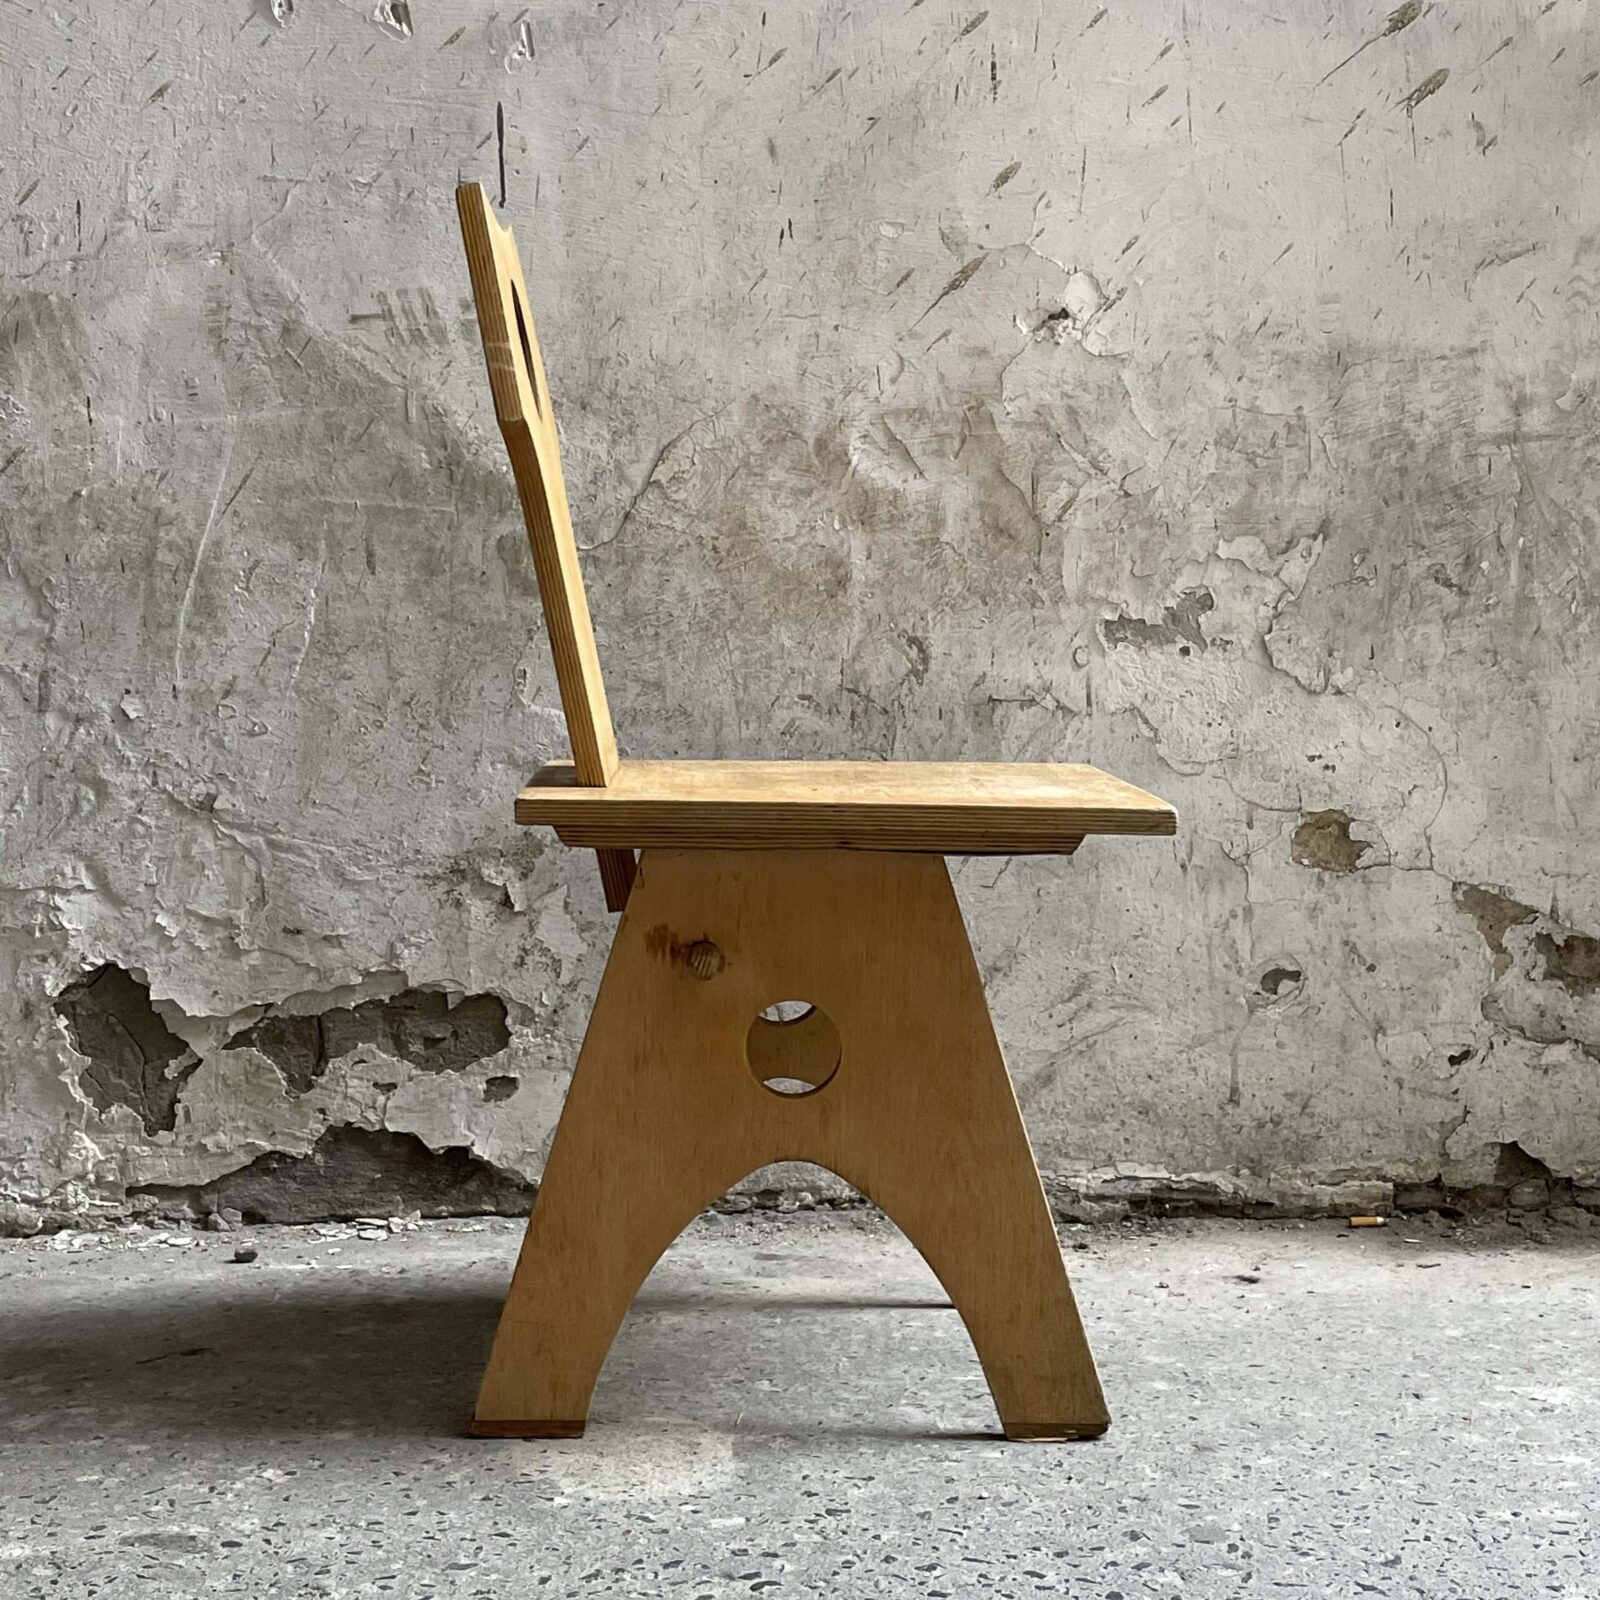 plywood primitive modernist chair side view